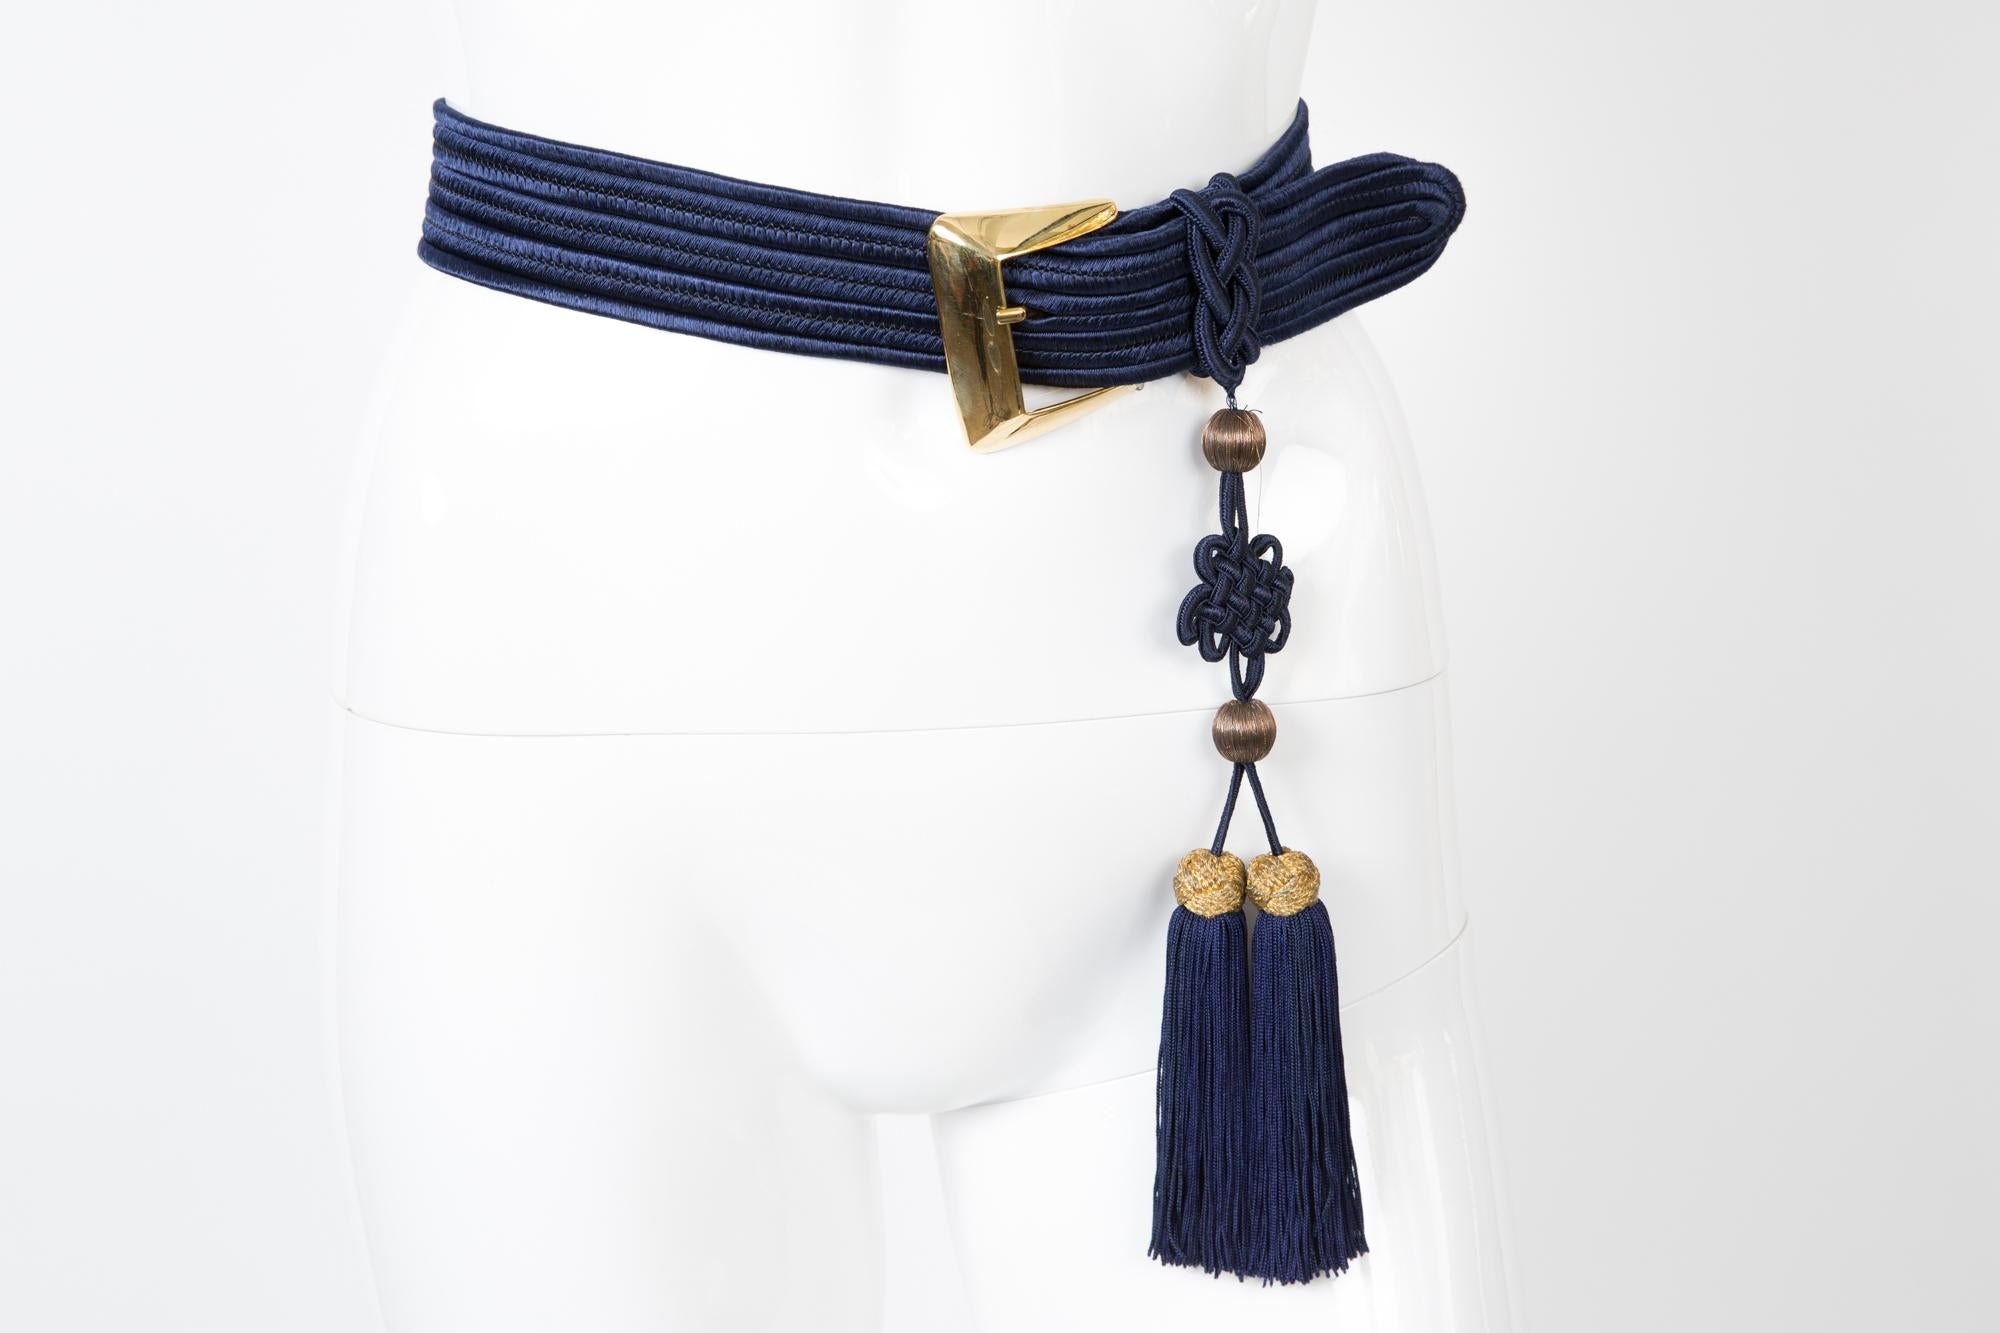 Blue Yves Saint Laurent braided belt featuring a fringed pompons, a gold tone buckle, logo gold tone metallic plaque. 
In excellent vintage condition. Made in France.  
Maxi Length 35in. (89 cm)
Width 1.5in. (4cm)
We guarantee you will receive this